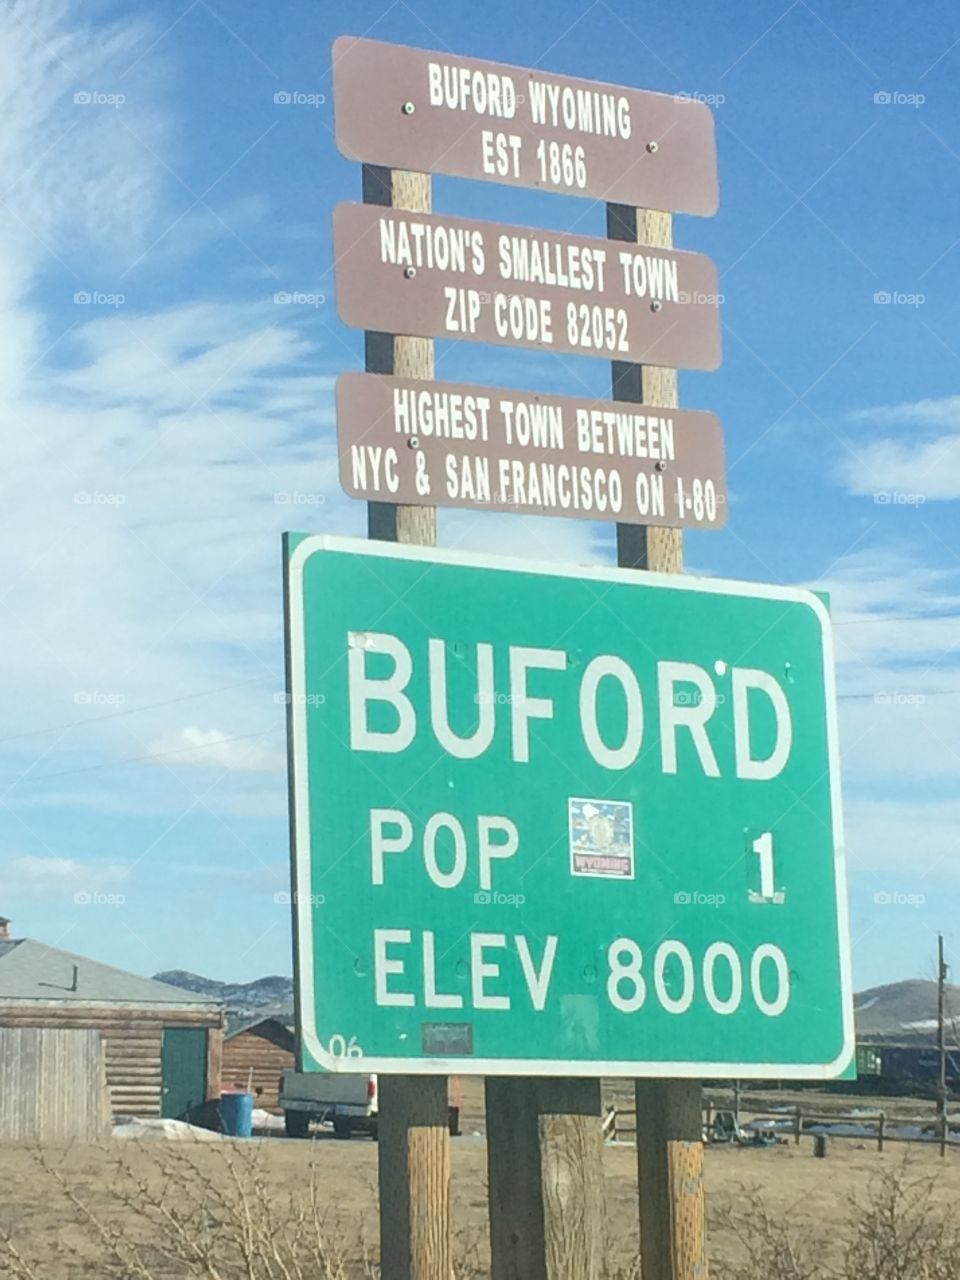 Town of Buford. Smallest town in the nation.